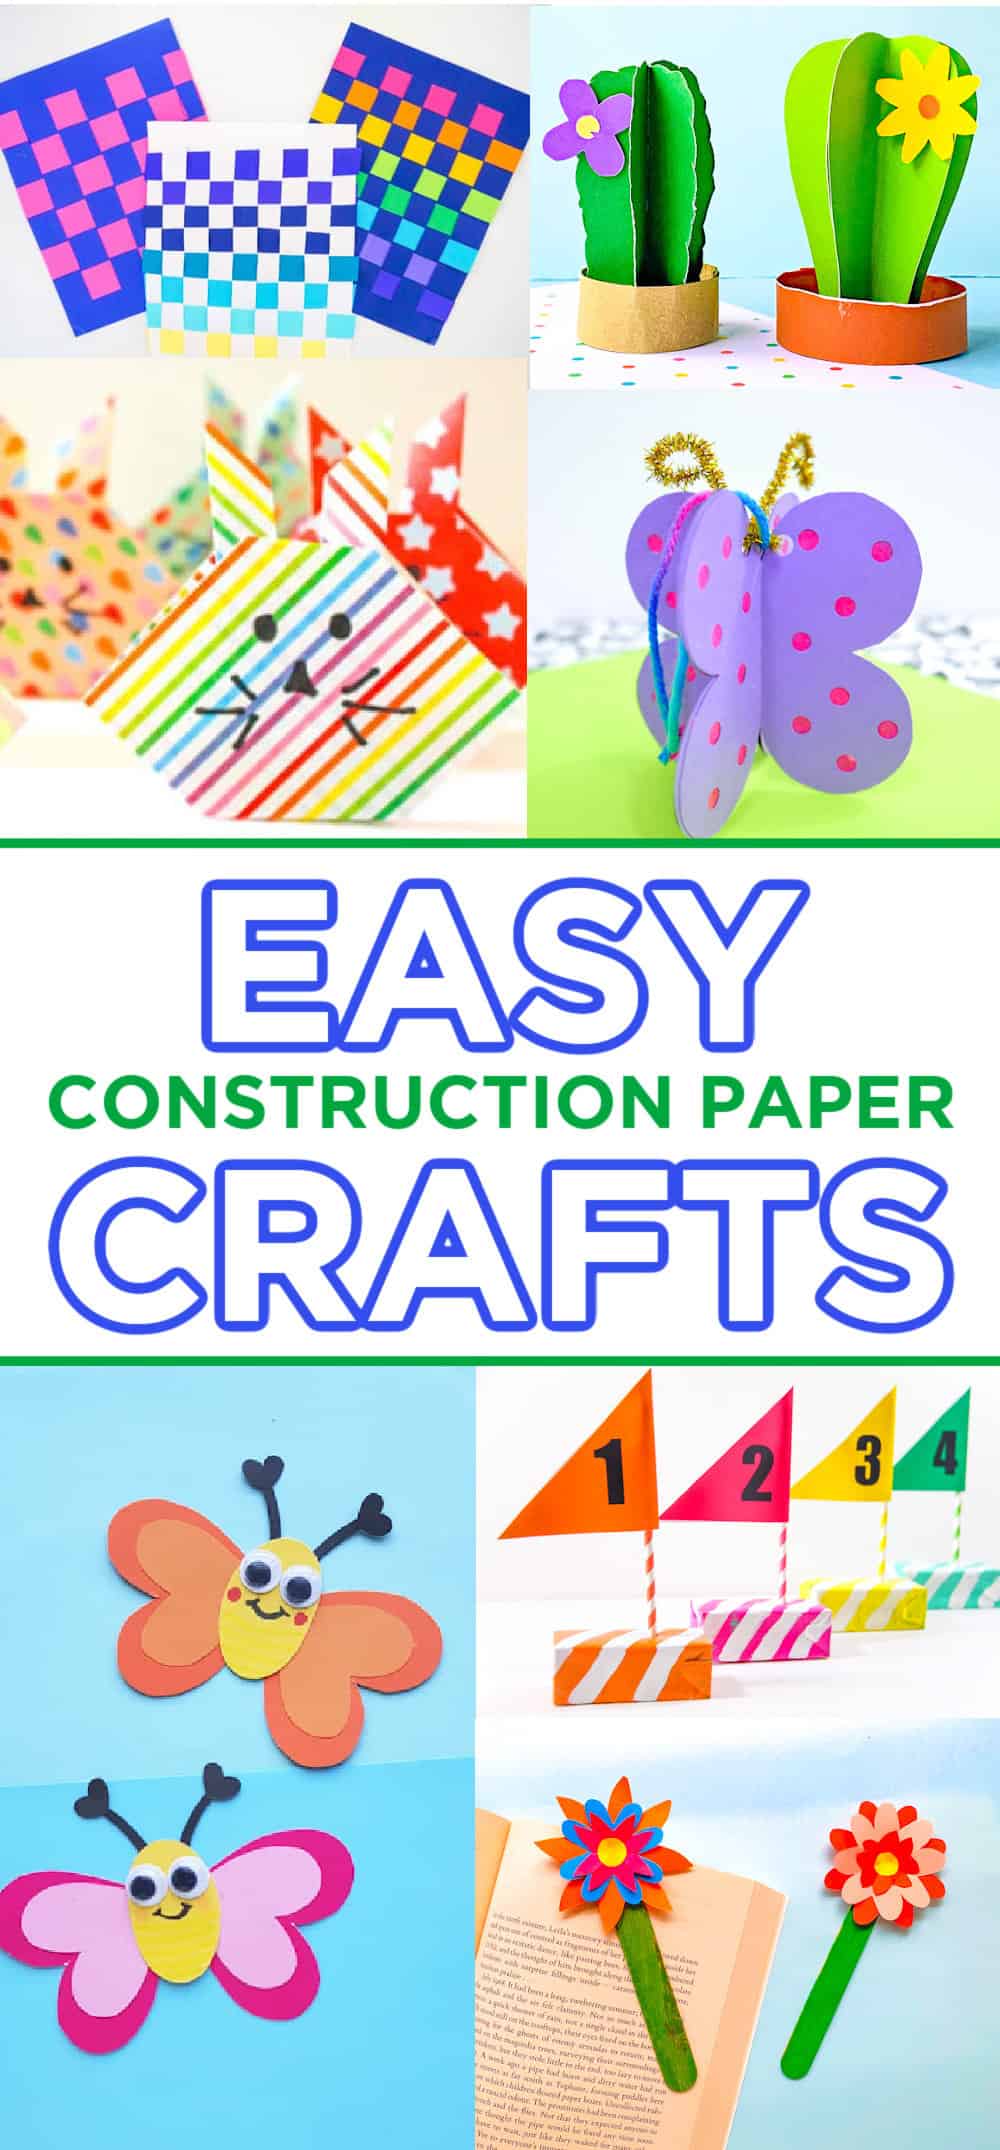 https://www.madewithhappy.com/wp-content/uploads/construction-paper-crafts.jpg